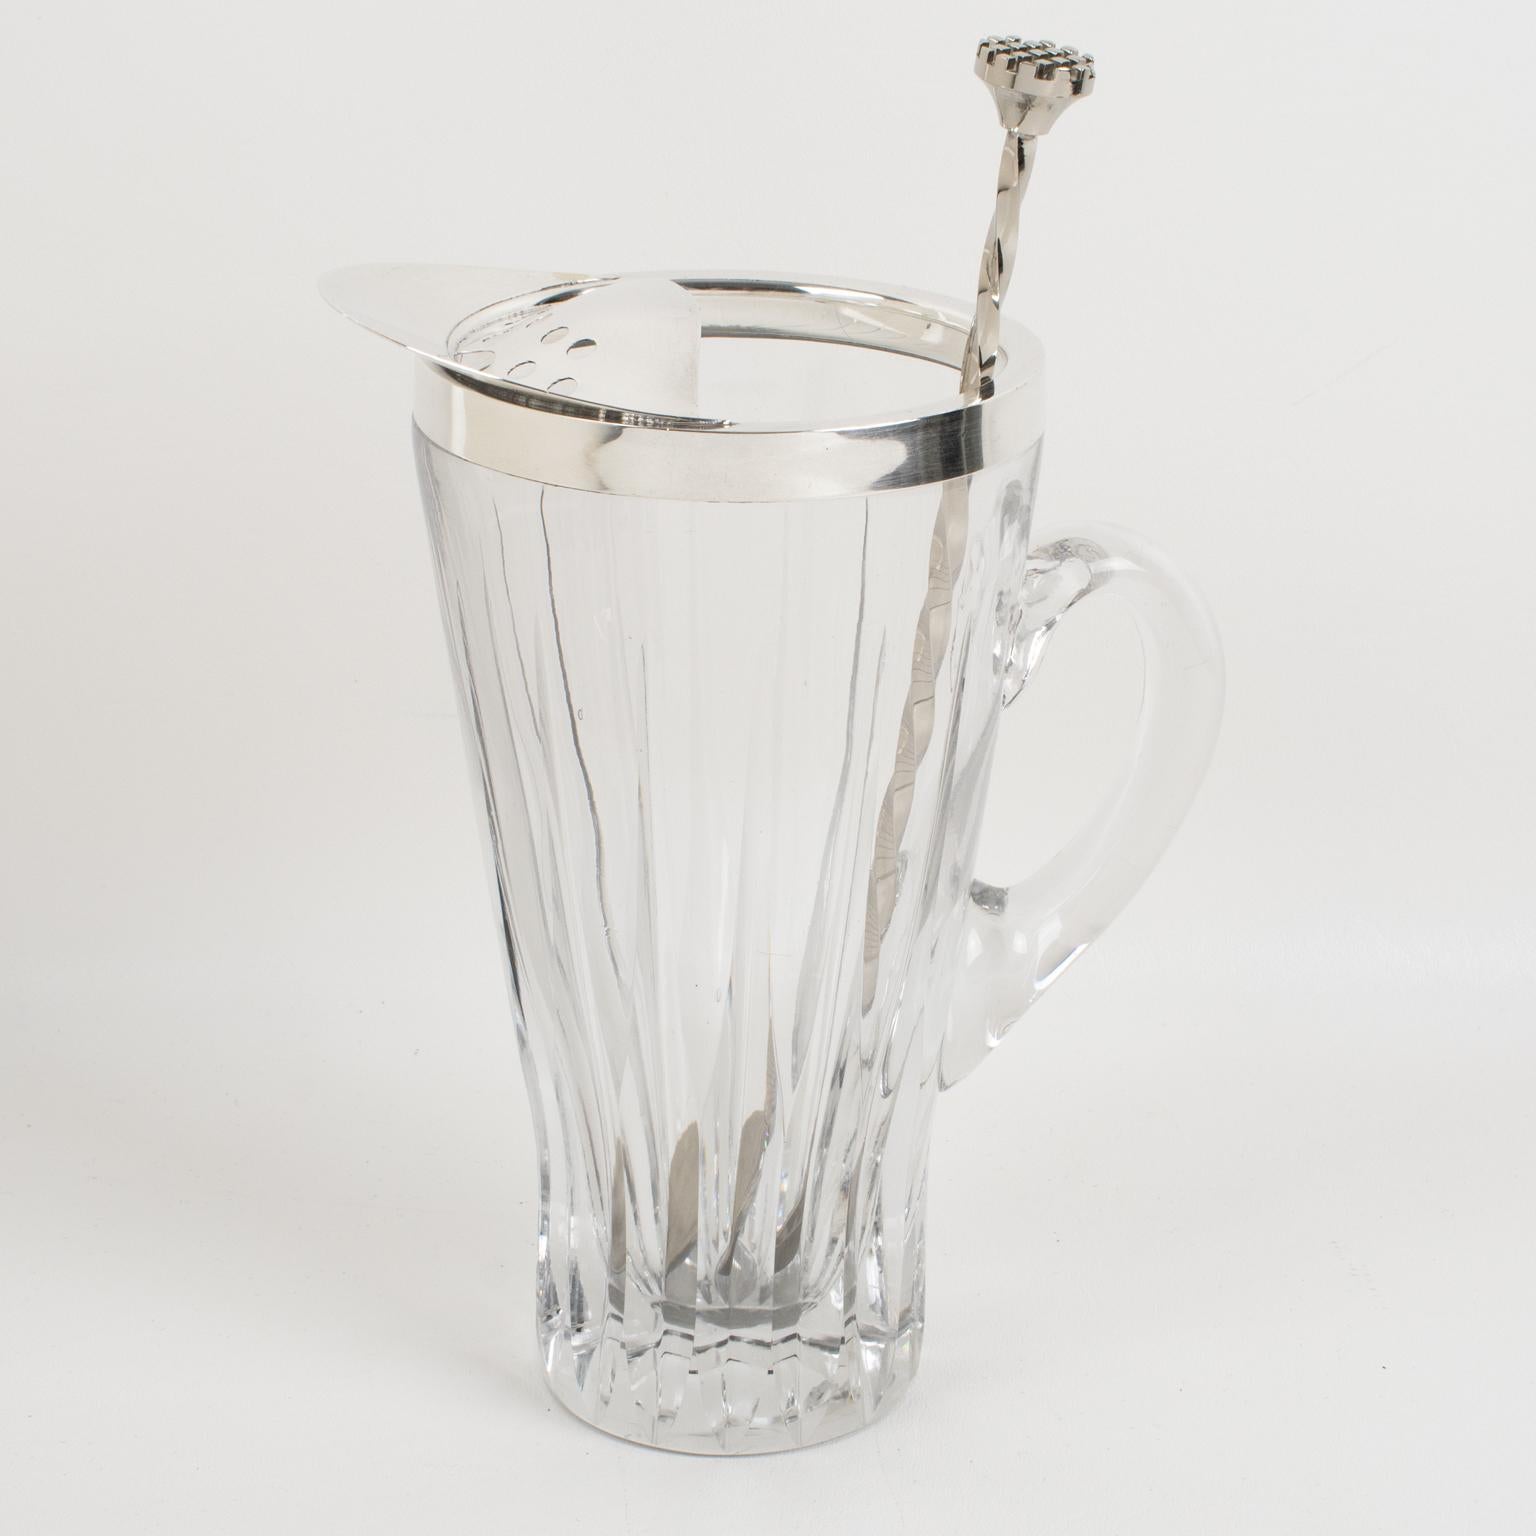 Silver Plate and Crystal Barware Cocktail Martini Pitcher with Stirrer 1